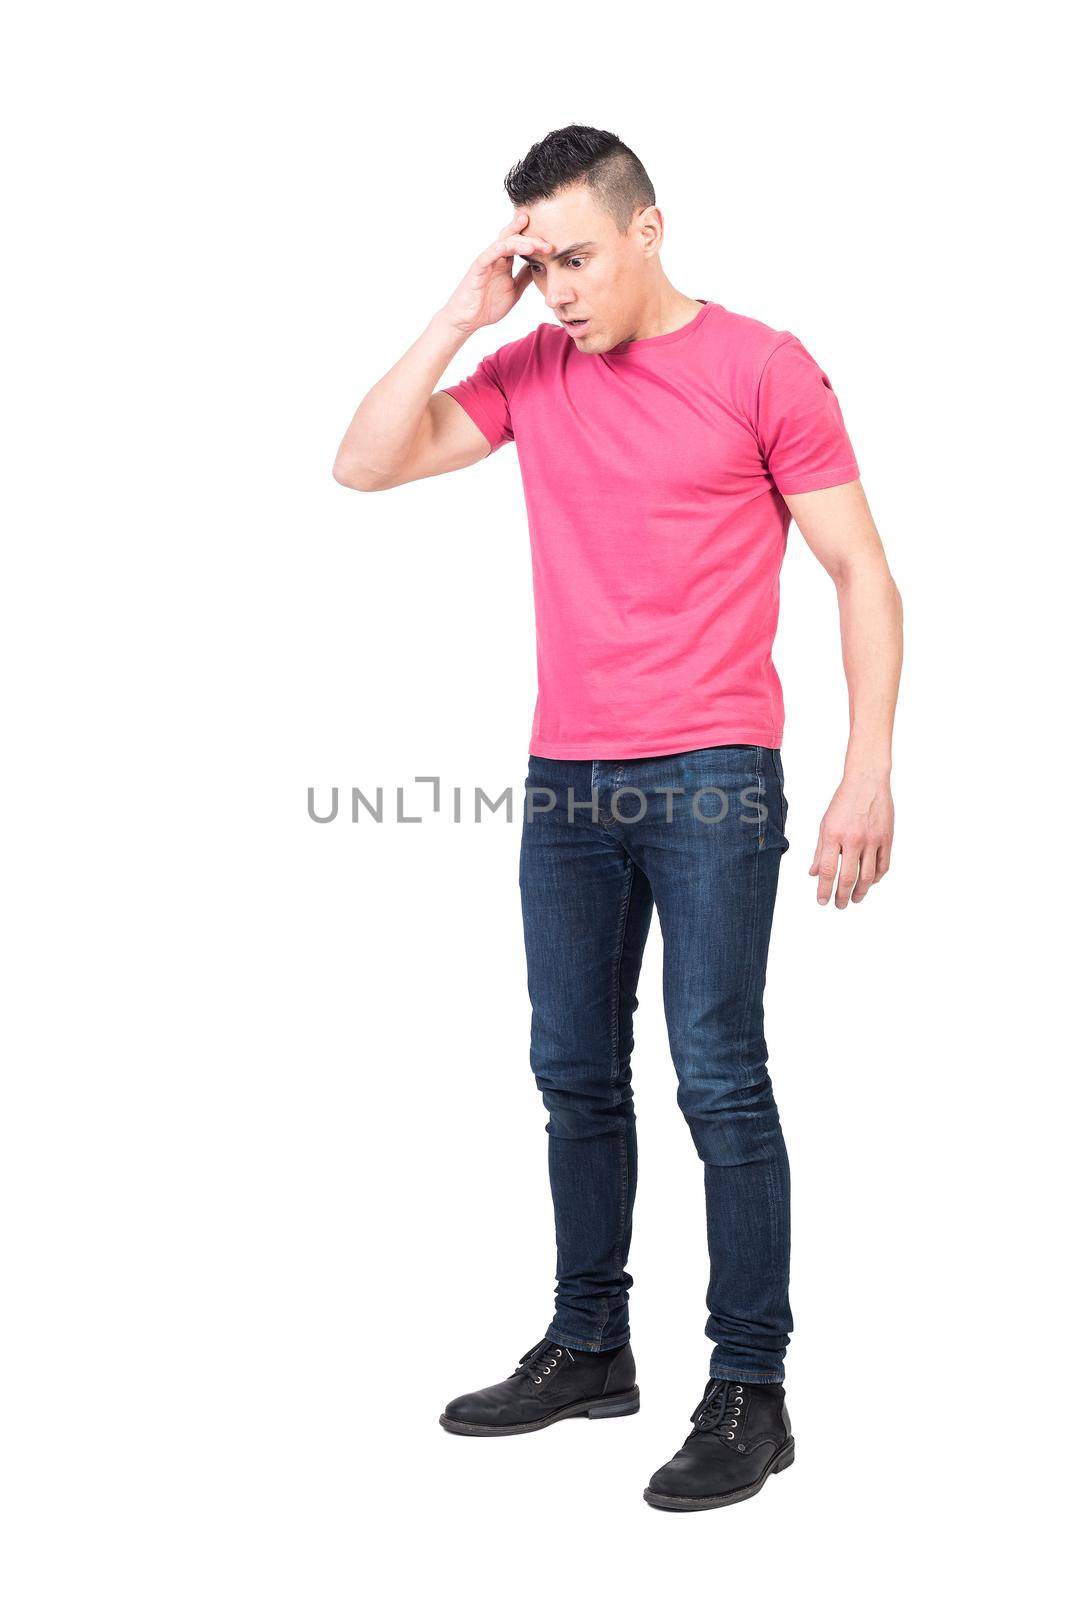 Full body of shocked young male with dark hair in casual outfit touching forehead and looking down with opened mouth against white background